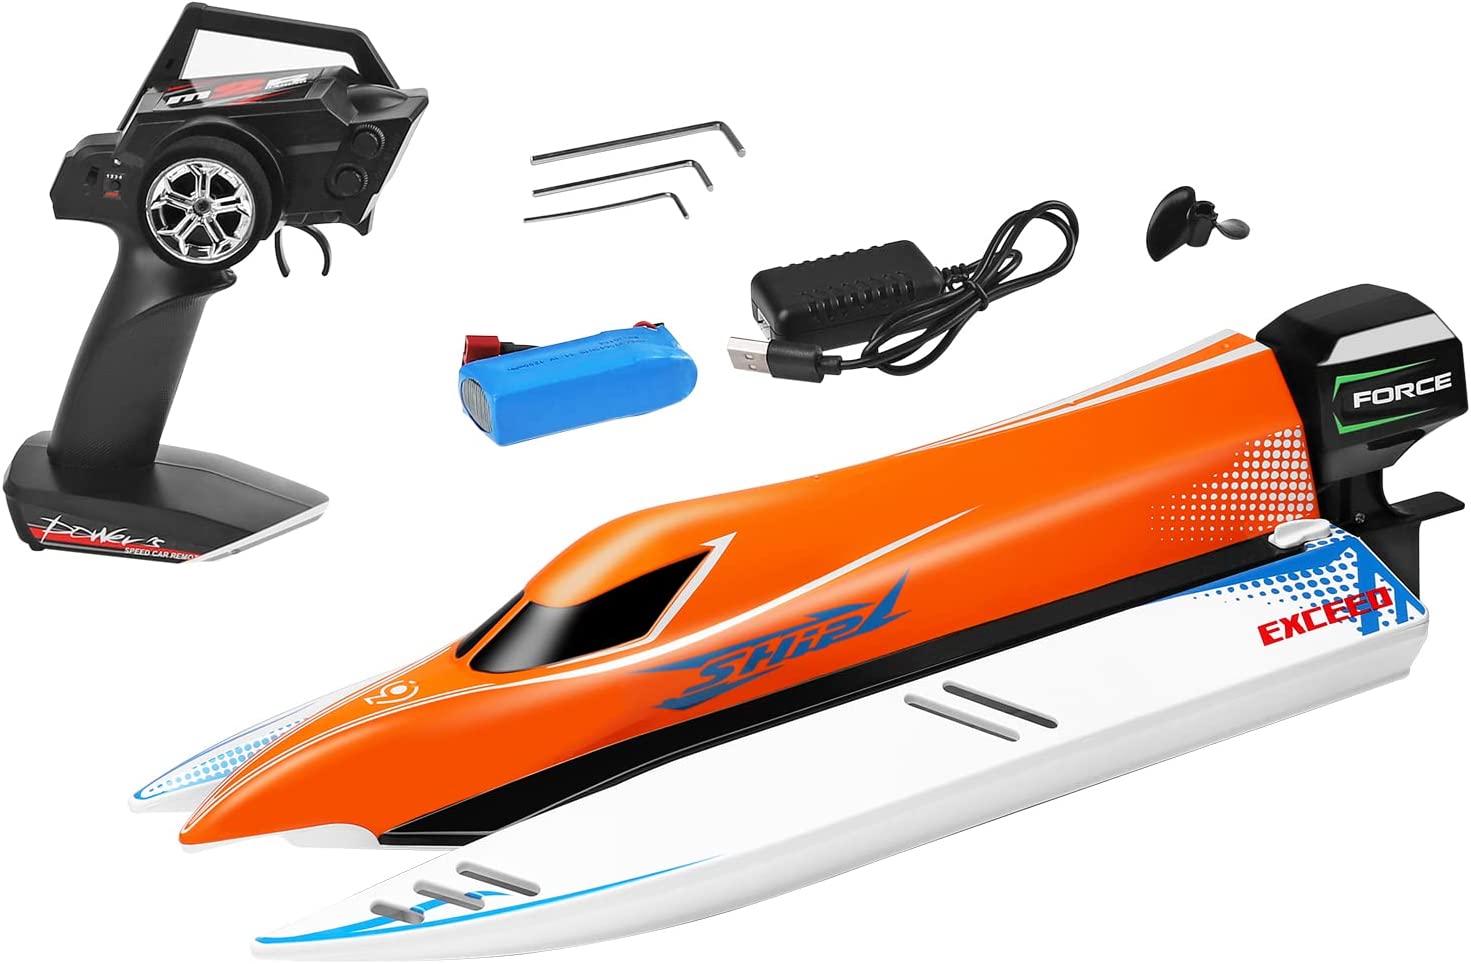 WLtoys WL915-A Brushless RC Boat, 2.4GHz Remote Control Boat, 45KM/H High Speed RC Racing Boat ( rights itself if flipped )